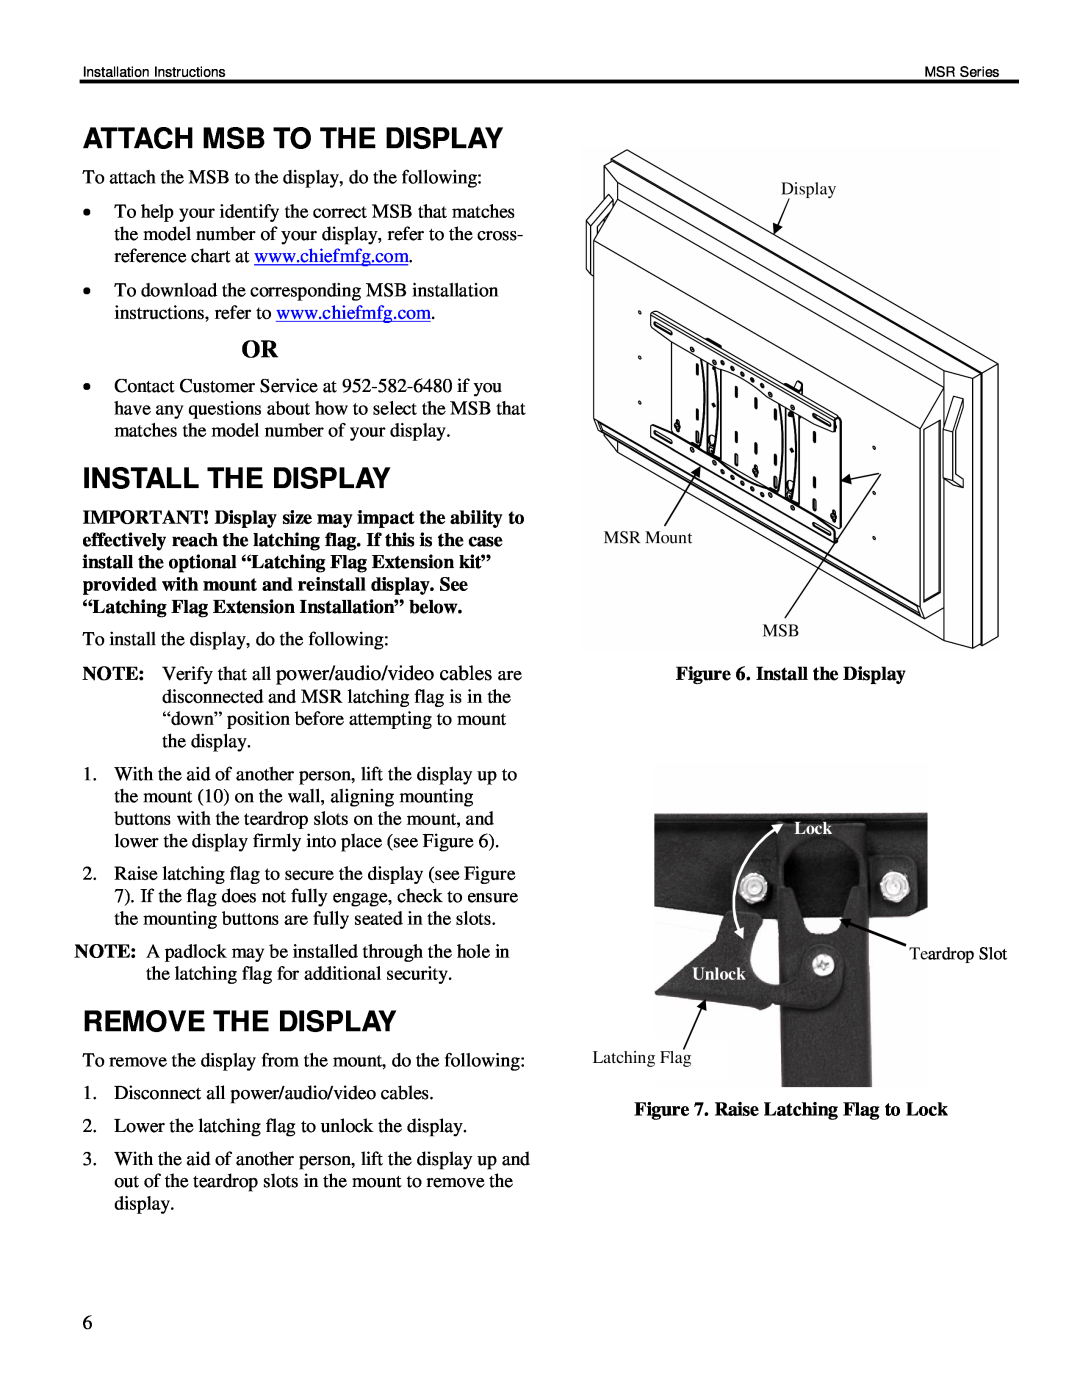 Chief Manufacturing MSR Series installation instructions Attach Msb To The Display, Install The Display, Remove The Display 